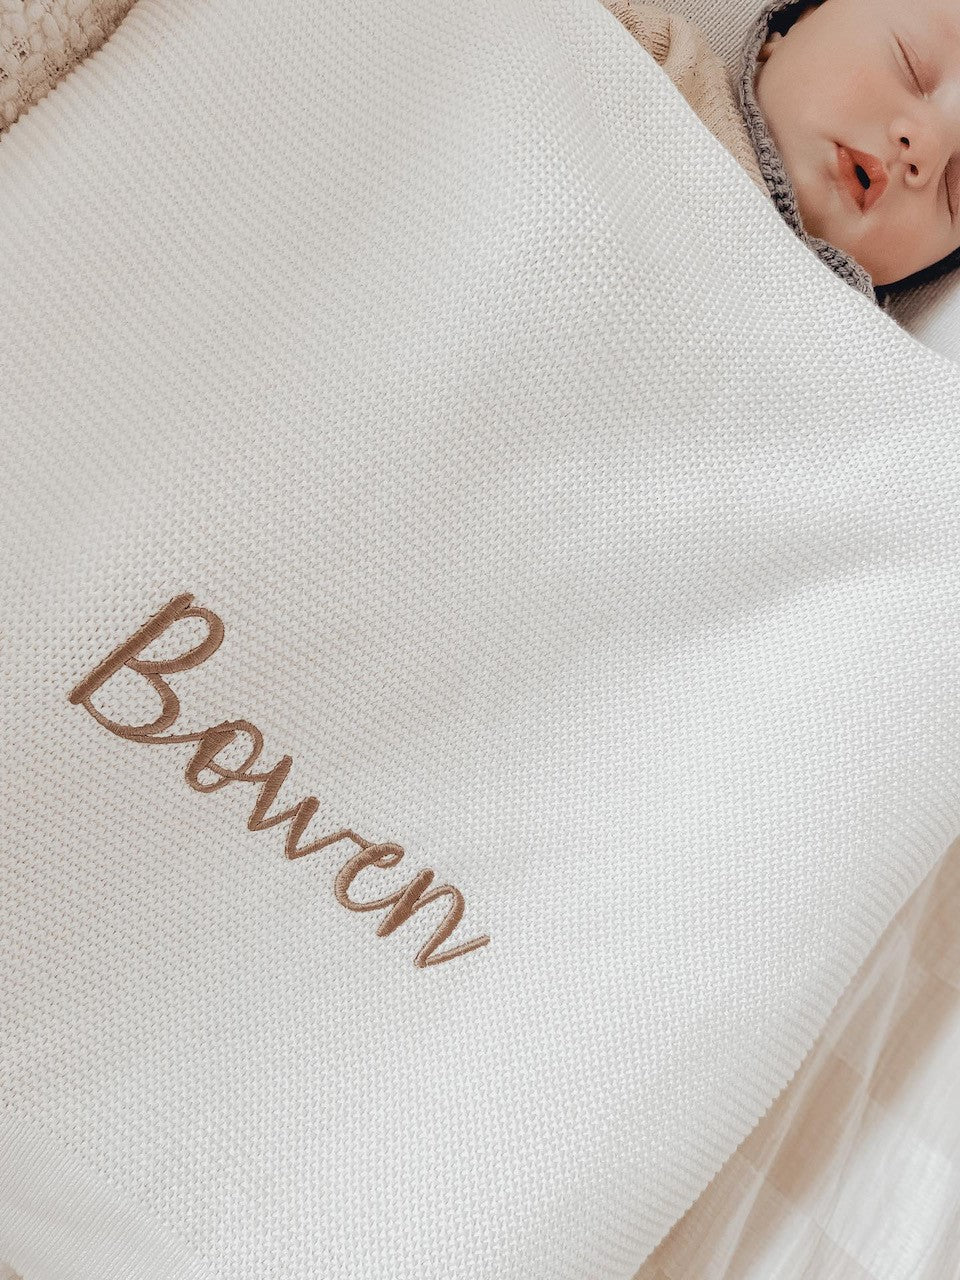 THICK BOARDER PERSONALISED BABY BLANKET | MILK